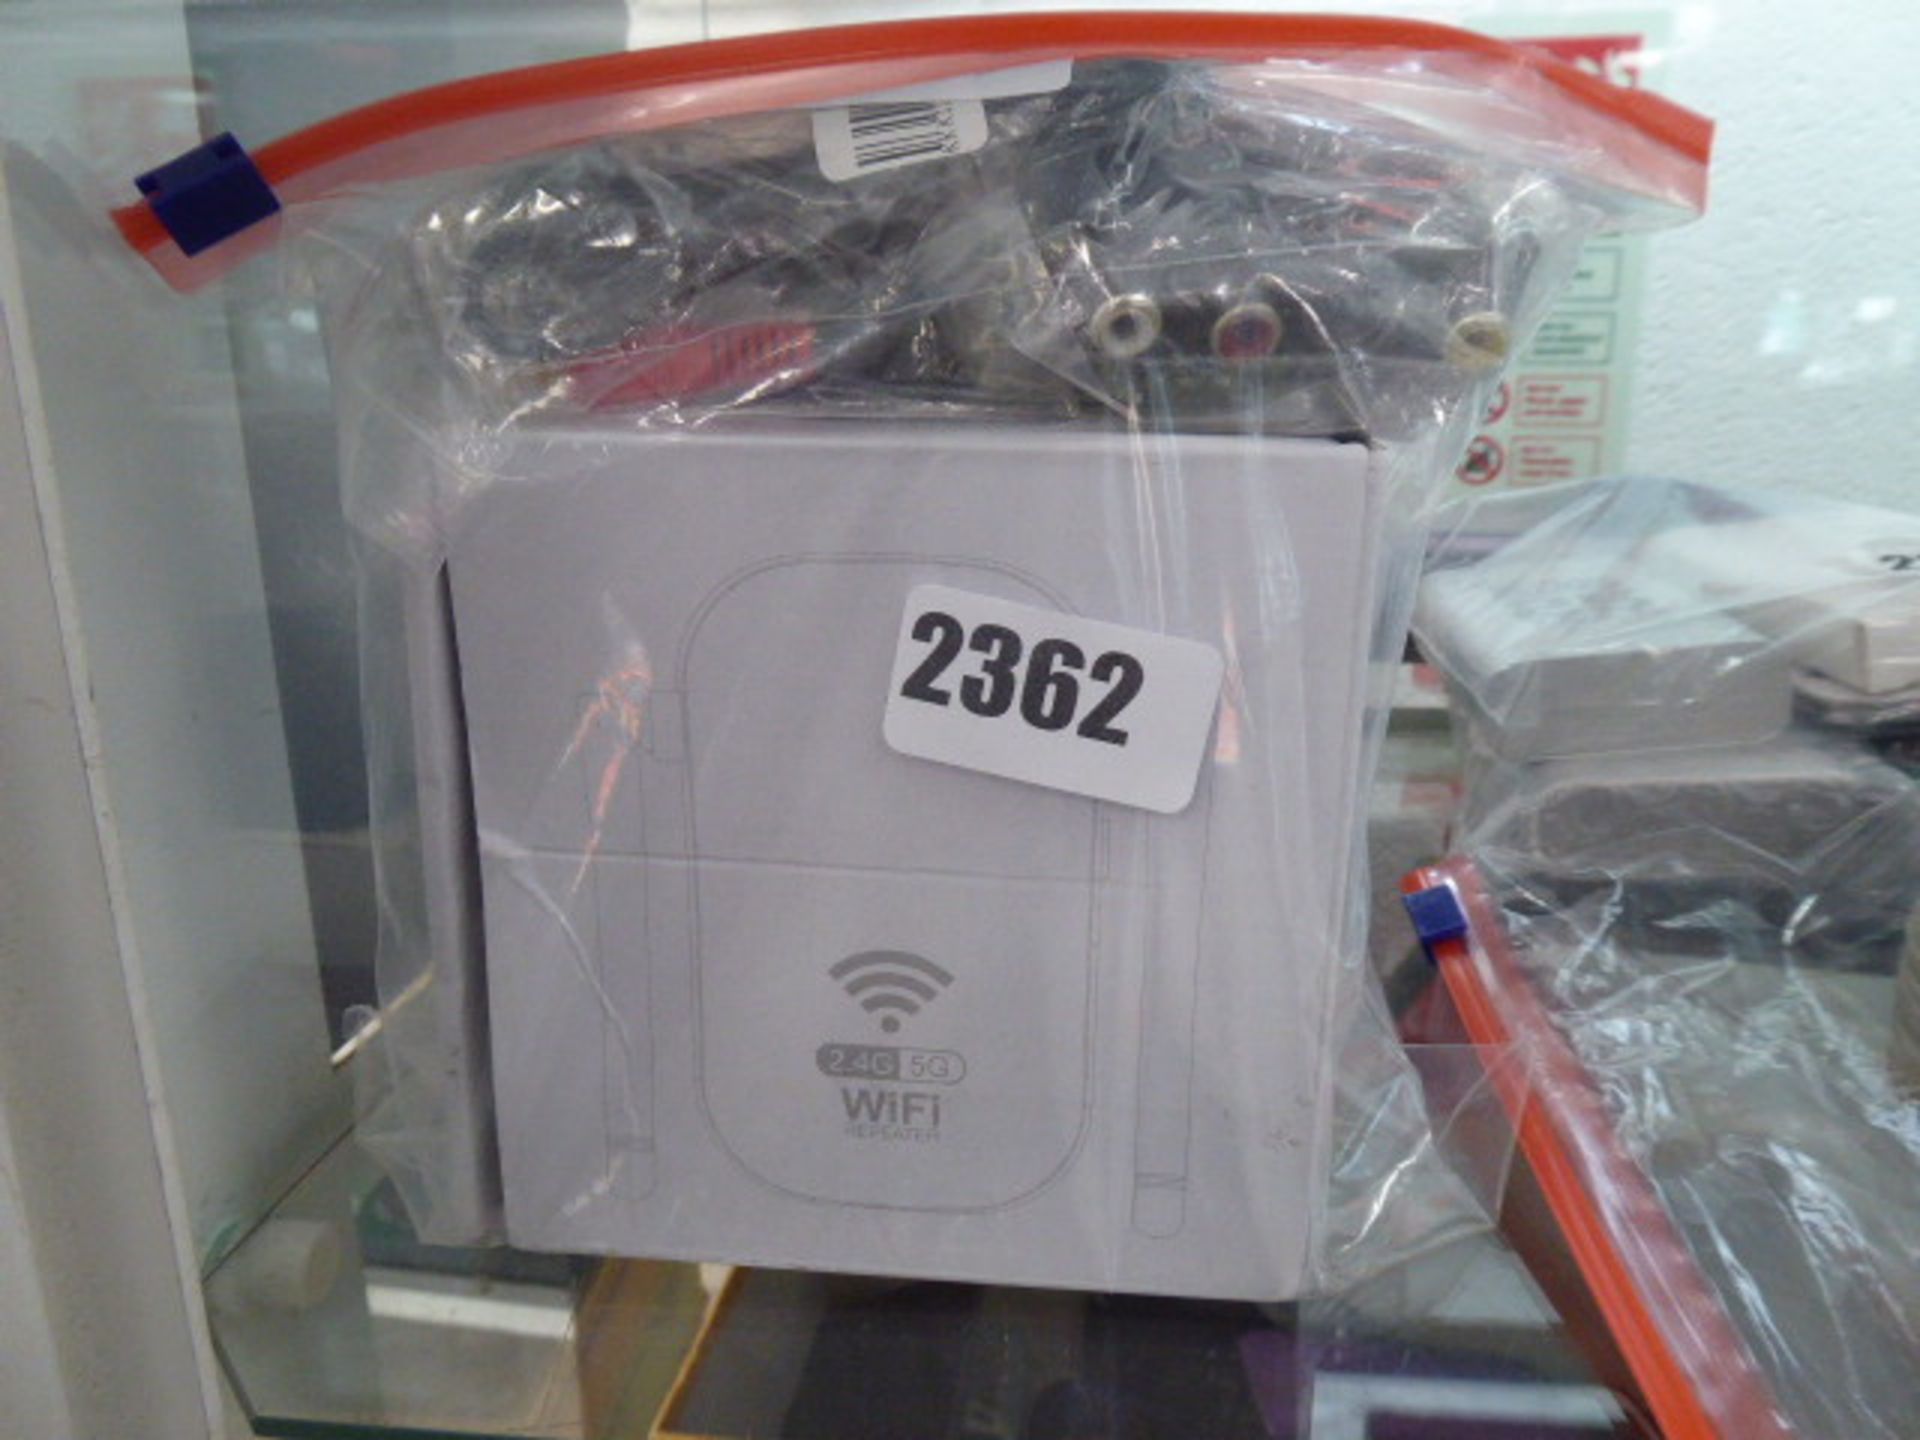 WiFi range extender and repeater system in bag